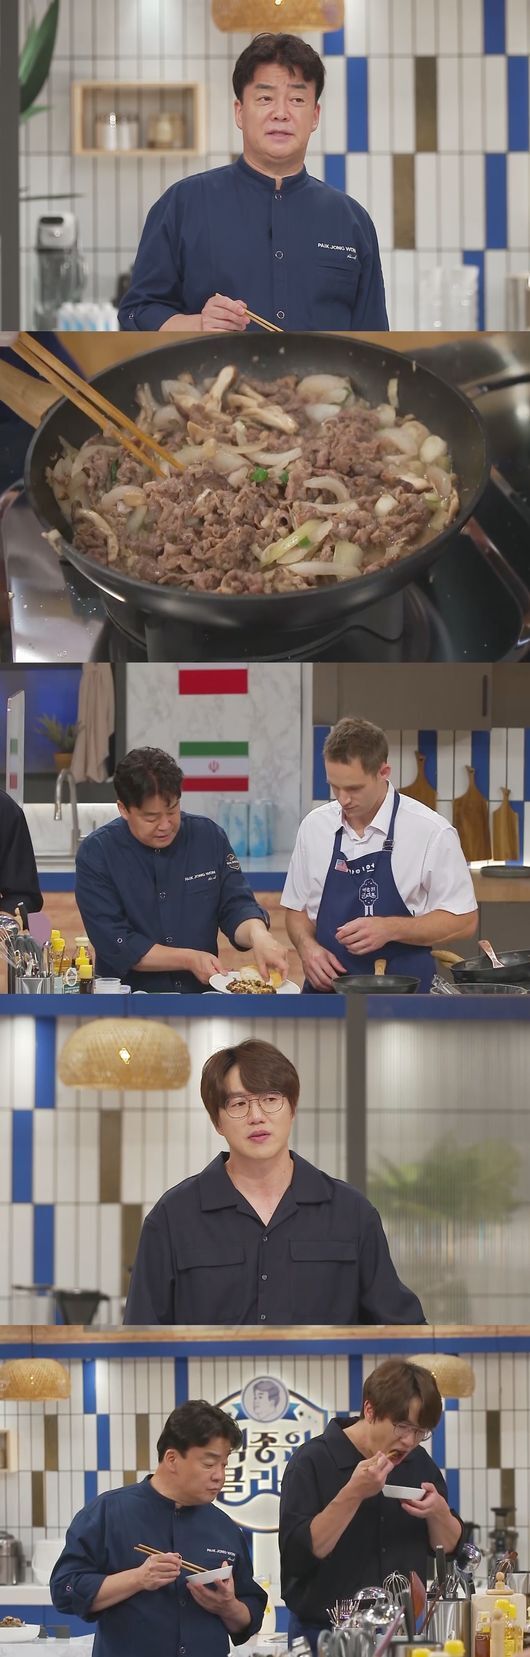 In Baek Jong-won Clath, cooking researcher Baek Jong-won reveals the secret of Bulgogi.In the 5th KBS 2TV entertainment program Baek Jong-won Clath broadcasted on the 26th, a new concept Bulgogi will be born with the ideas of global Korean newbies.I am curious about what kind of dish the former World loves to meet with overseas ingredients and re-create.Prior to cooking, Baek Jong-won will explain the various kinds of Bulgogi and will release the ingredients that can be used if there is no Korean ship among Bulgogis ingredients.Baek Jong-won emphasizes the importance of principles, saying, The basics are kept, but the application is at will.Ashley, Ryan, Amy, Aidin and Matthew, who have entered full-scale cooking, bring their own unique ingredients and combine them with the Bulgogi recipe taught by Baek Jong-won to present a new concept global Bulgogi.The ingredients brought by the newbies show the expectation of the birth of the new Bulgogi, Baek Jong-won and Sung Si-kyung.I wonder what kind of dishes will be completed this time by the newbies who made global Korean by putting them into overseas ingredients such as dried apricot, salami, and salsa sauce.Above all, Baek Jong-won and Sung Si-kyung are impressed after tasting the Bulgogi made by Korean newbies.Sung Si-kyung says, It is a bulgogi that I have not eaten in 43 years. Baek Jong-won raises expectations by evaluating I can eat a restaurant menu.Who will be the newest to be Wando in the final penalty by making the last place in the making of Bulgogi, and the results of the more intense Bulgogi convenience than ever can be confirmed on the 26th.Baek Jong-won Clath is an entertainment that teaches the Korean basics of what Korean is really for the global Korean newcomers and informs the former World people of the charm of Korean.Due to the Olympic broadcast, the broadcast time will be changed from 8:30 pm to 10:00 pm on the 26th.KBS is provided.